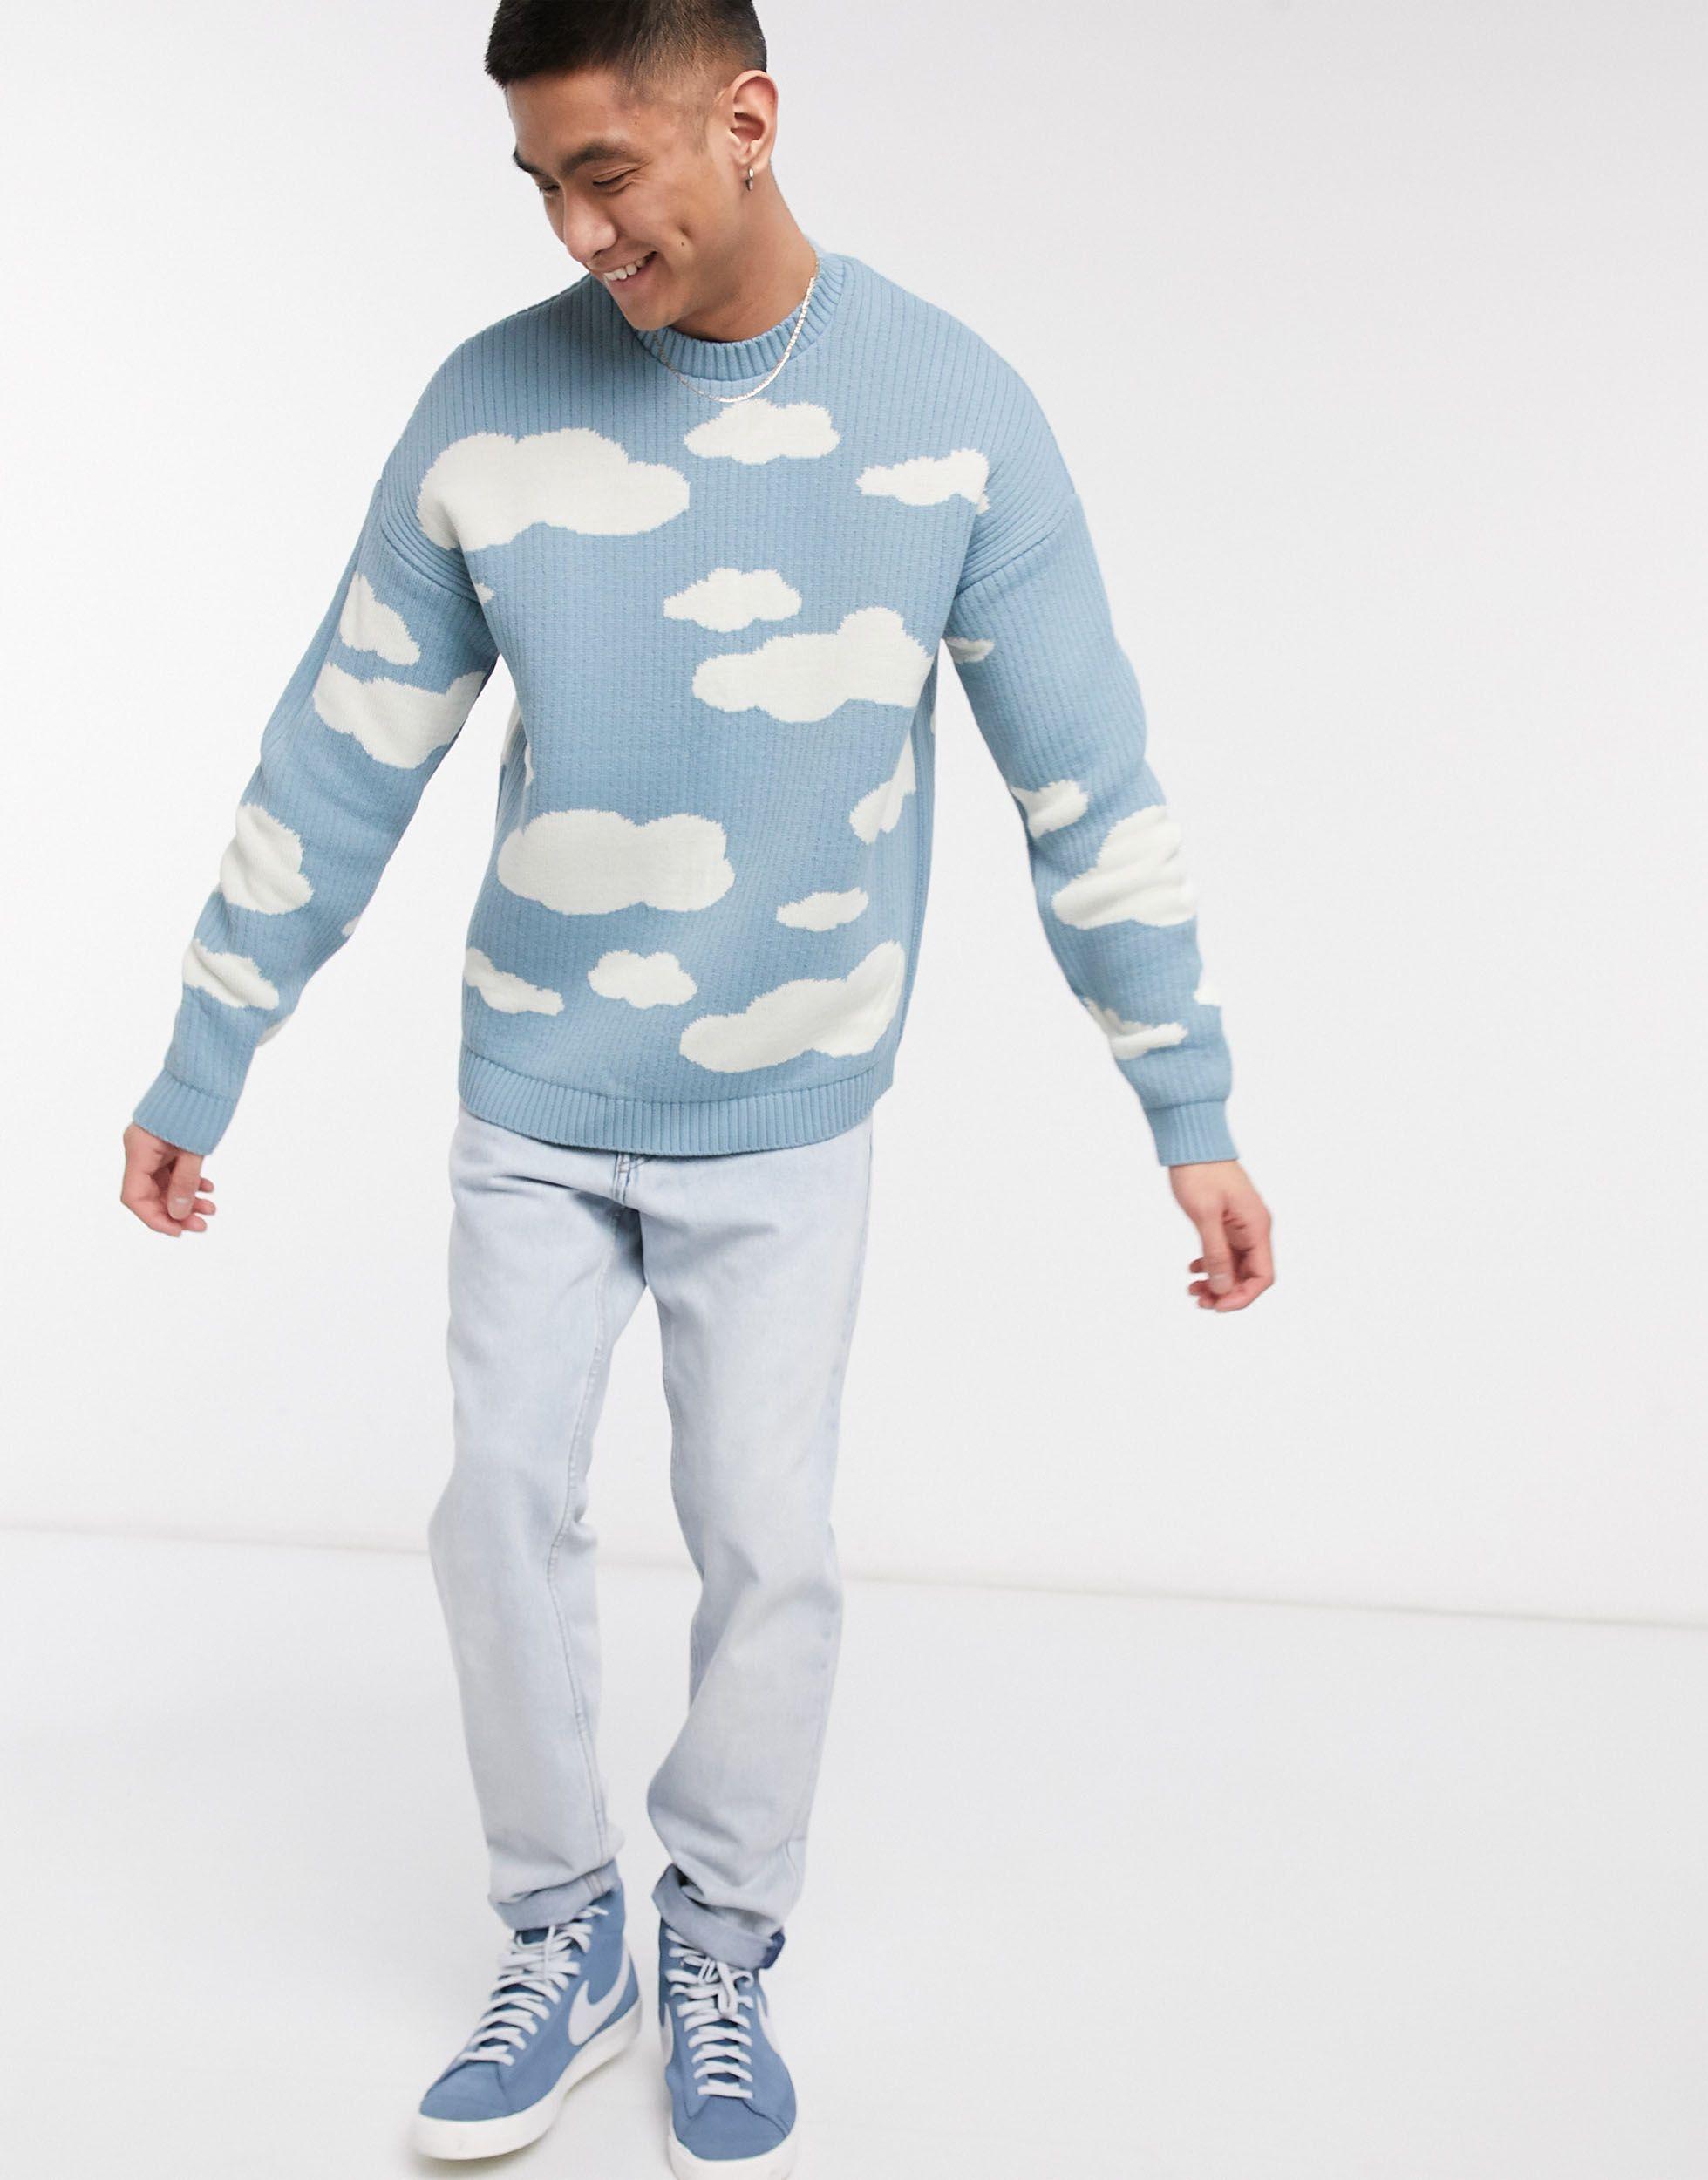 ASOS Sweater With Clouds Design in Grey for Men